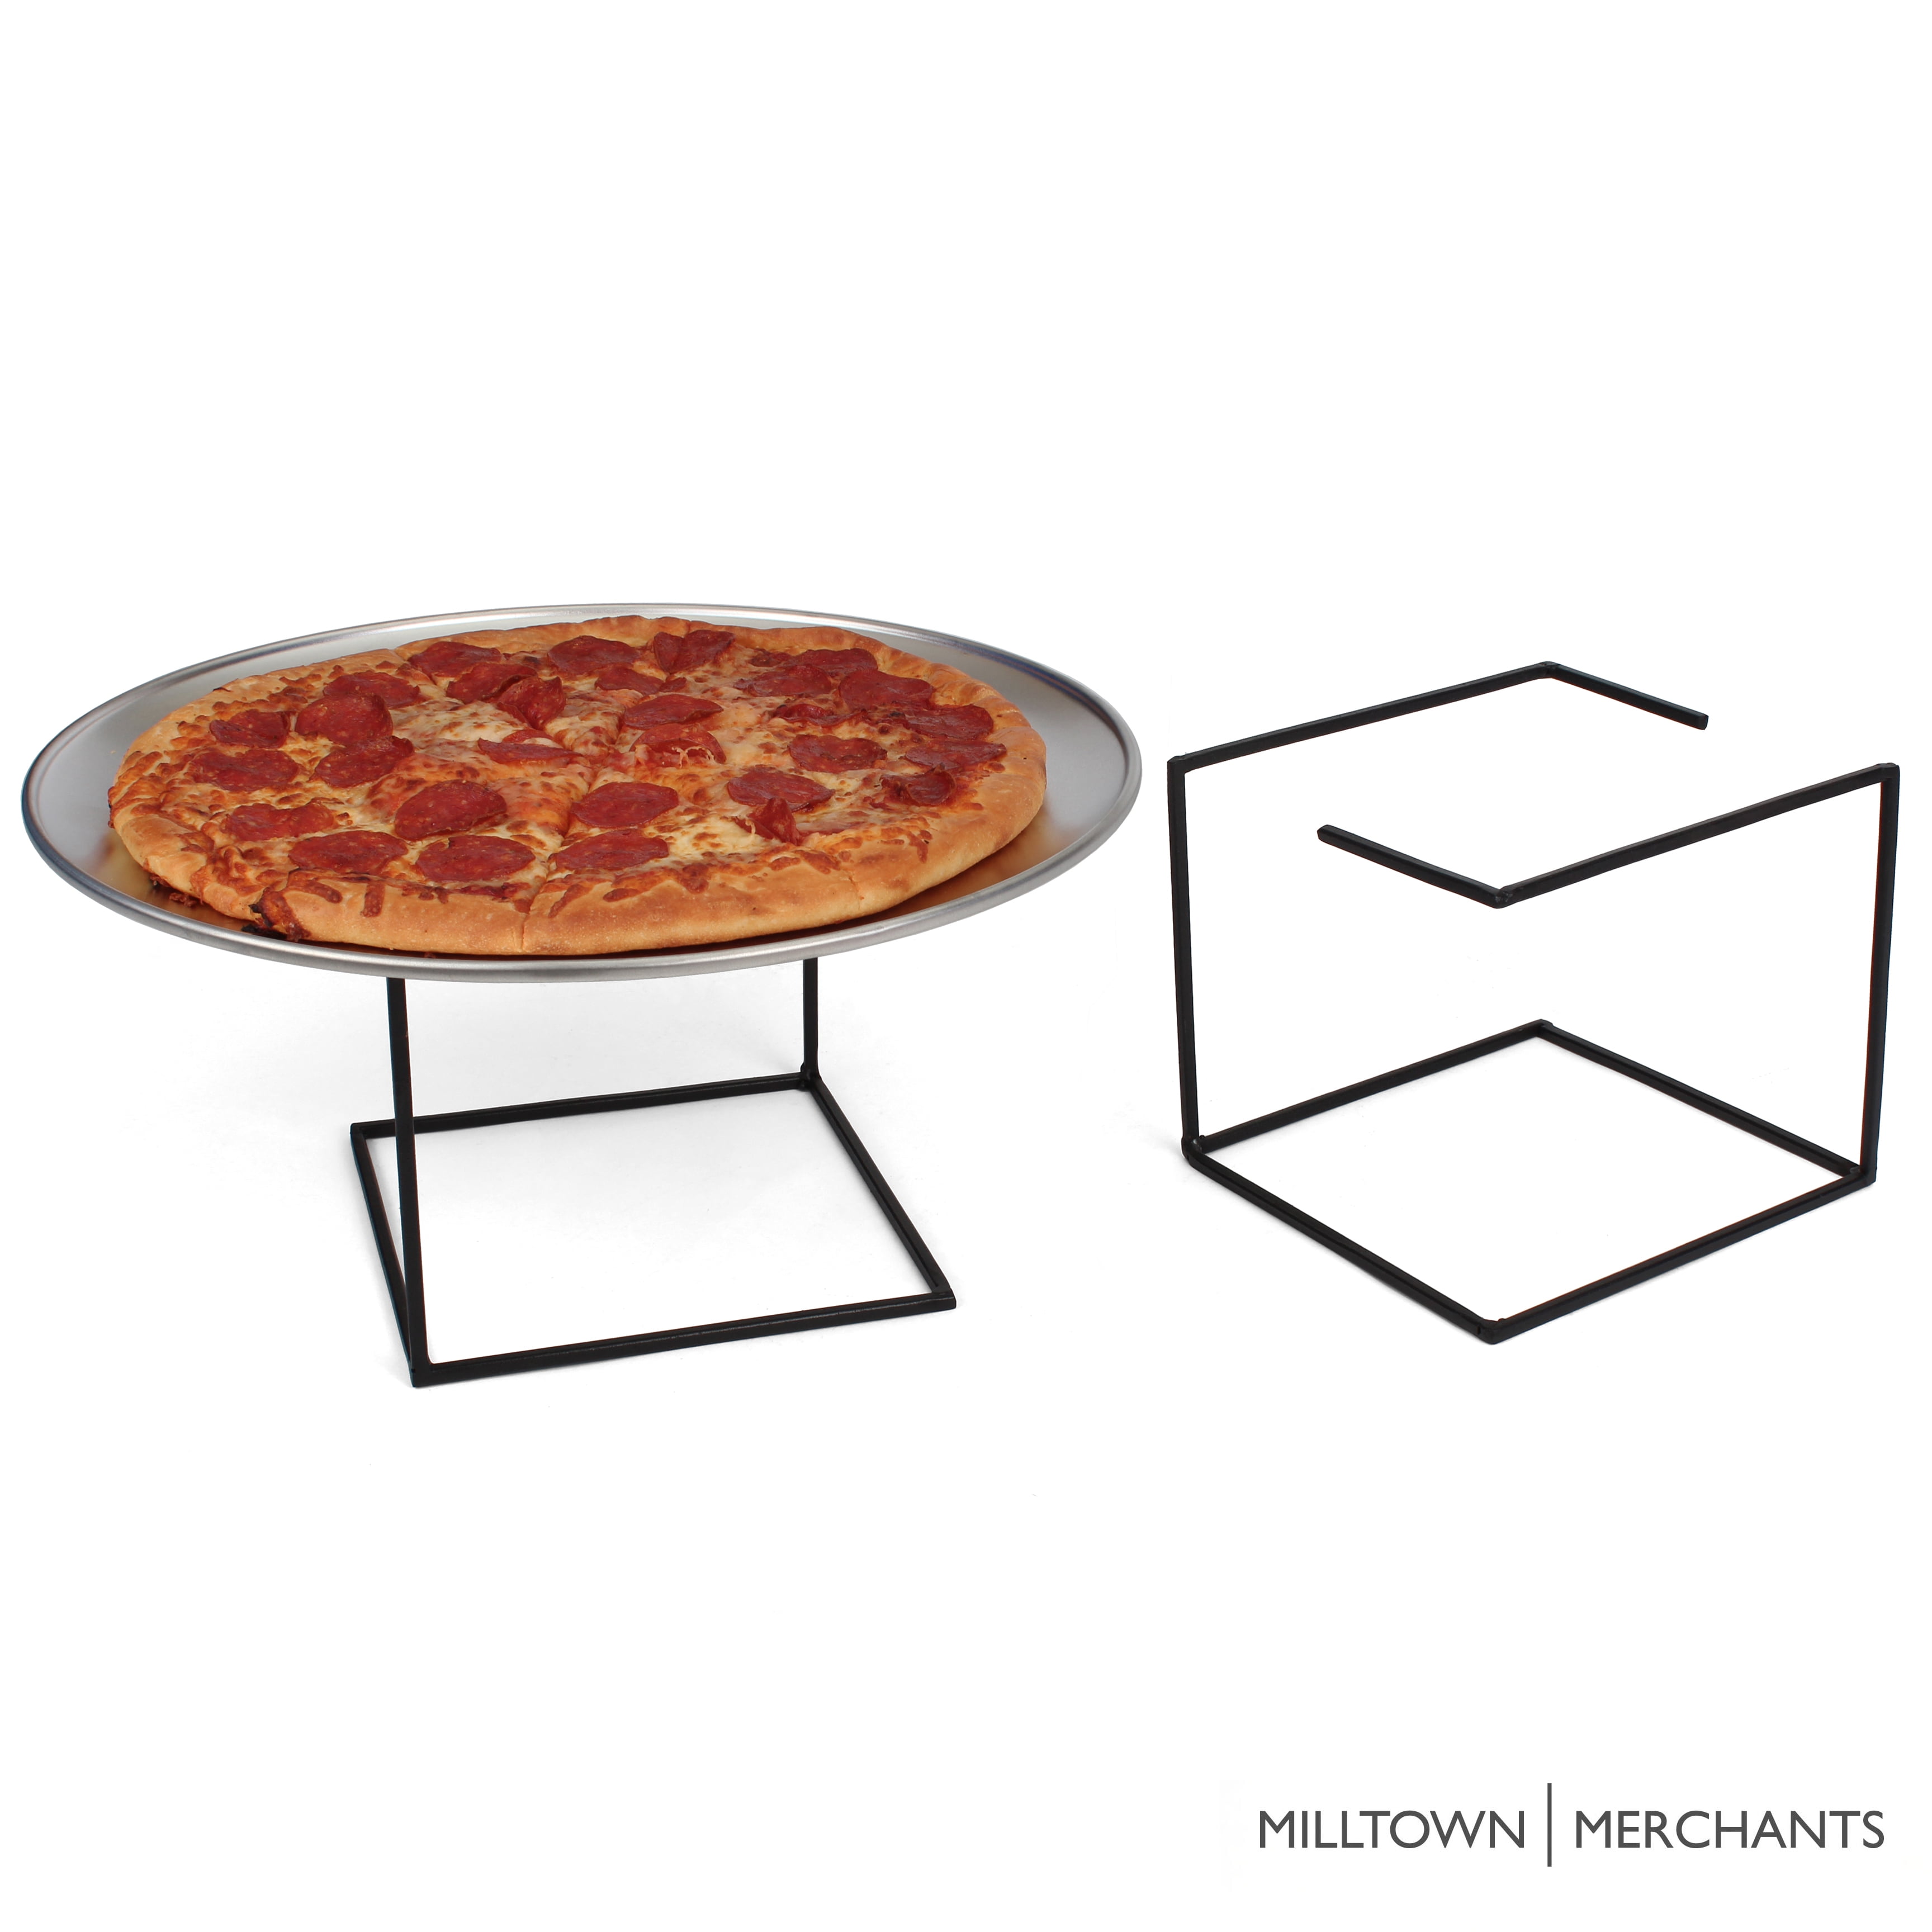 Milltown Merchants Metal Pizza Stand Tabletop Risers Pizza Dishes for Pan Holder and Tray Pizzas, - Platters, 